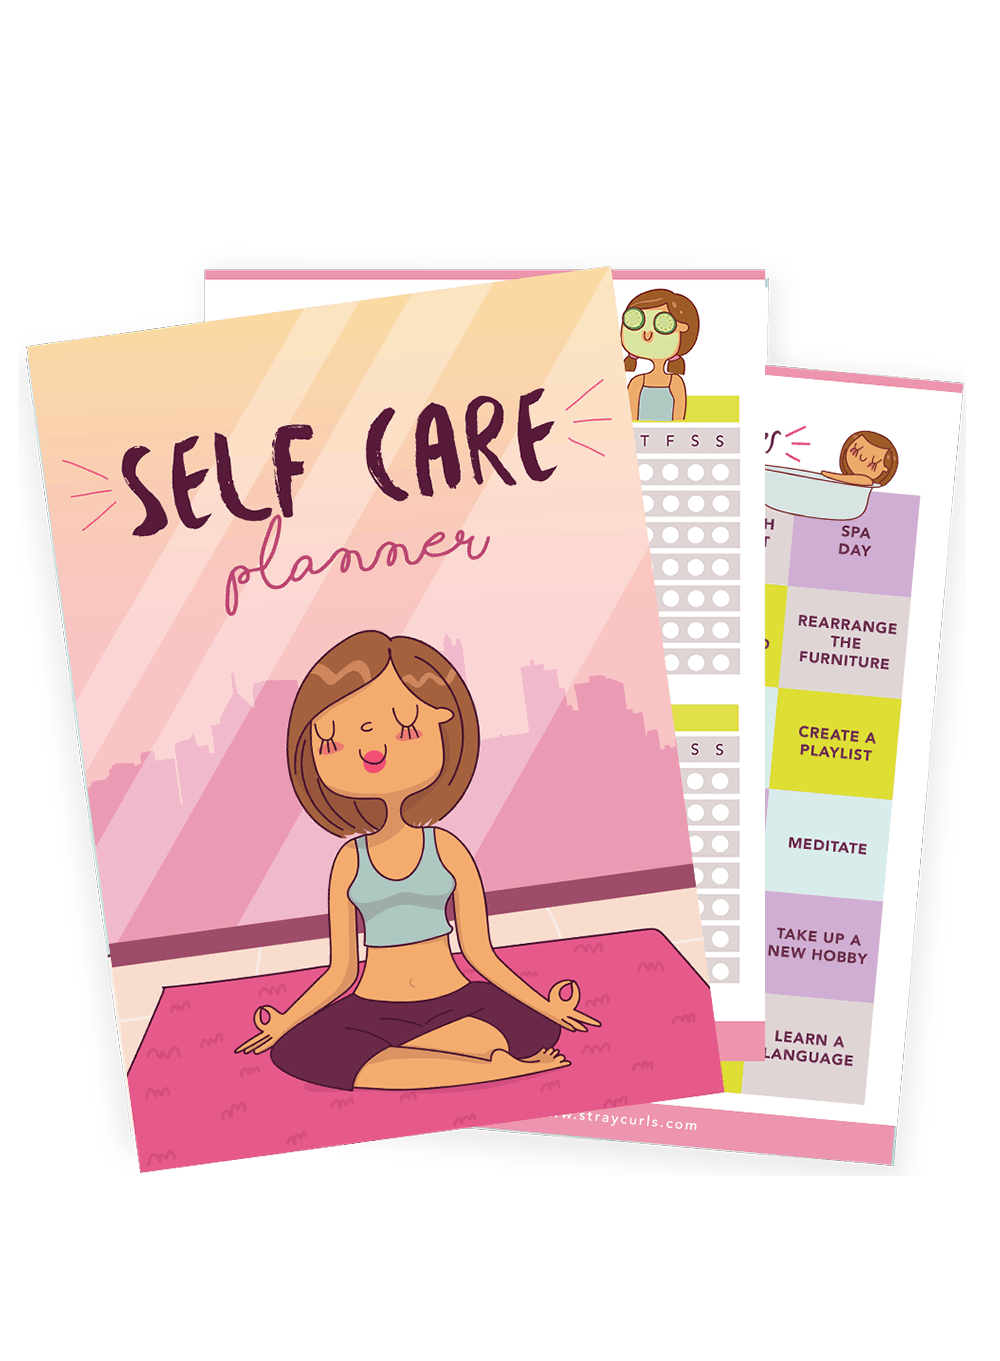 The Ultimate Self Care Planner to help you become a better version of you! Includes a meal tracker, period tracker, and loads of self care tips!